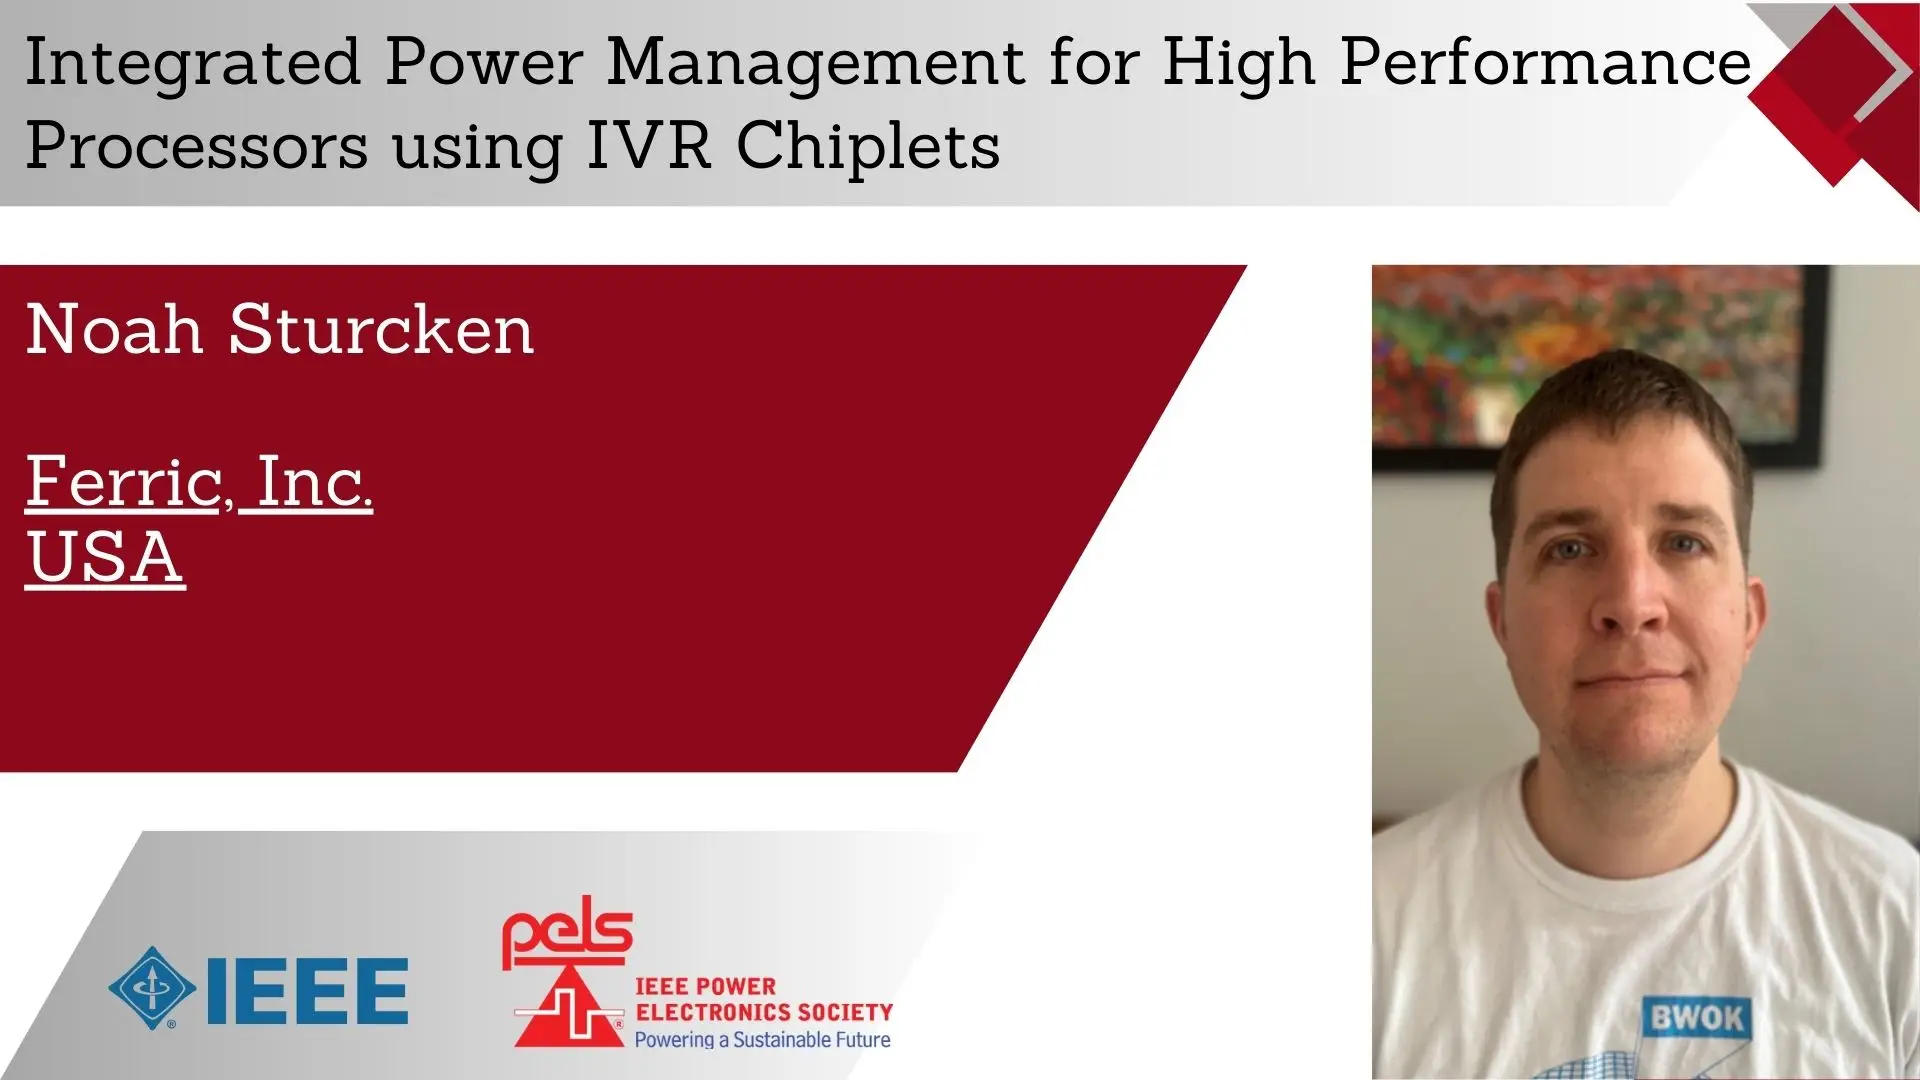 Integrated Power Management for High Performance Processors using IVR Chiplets -Video